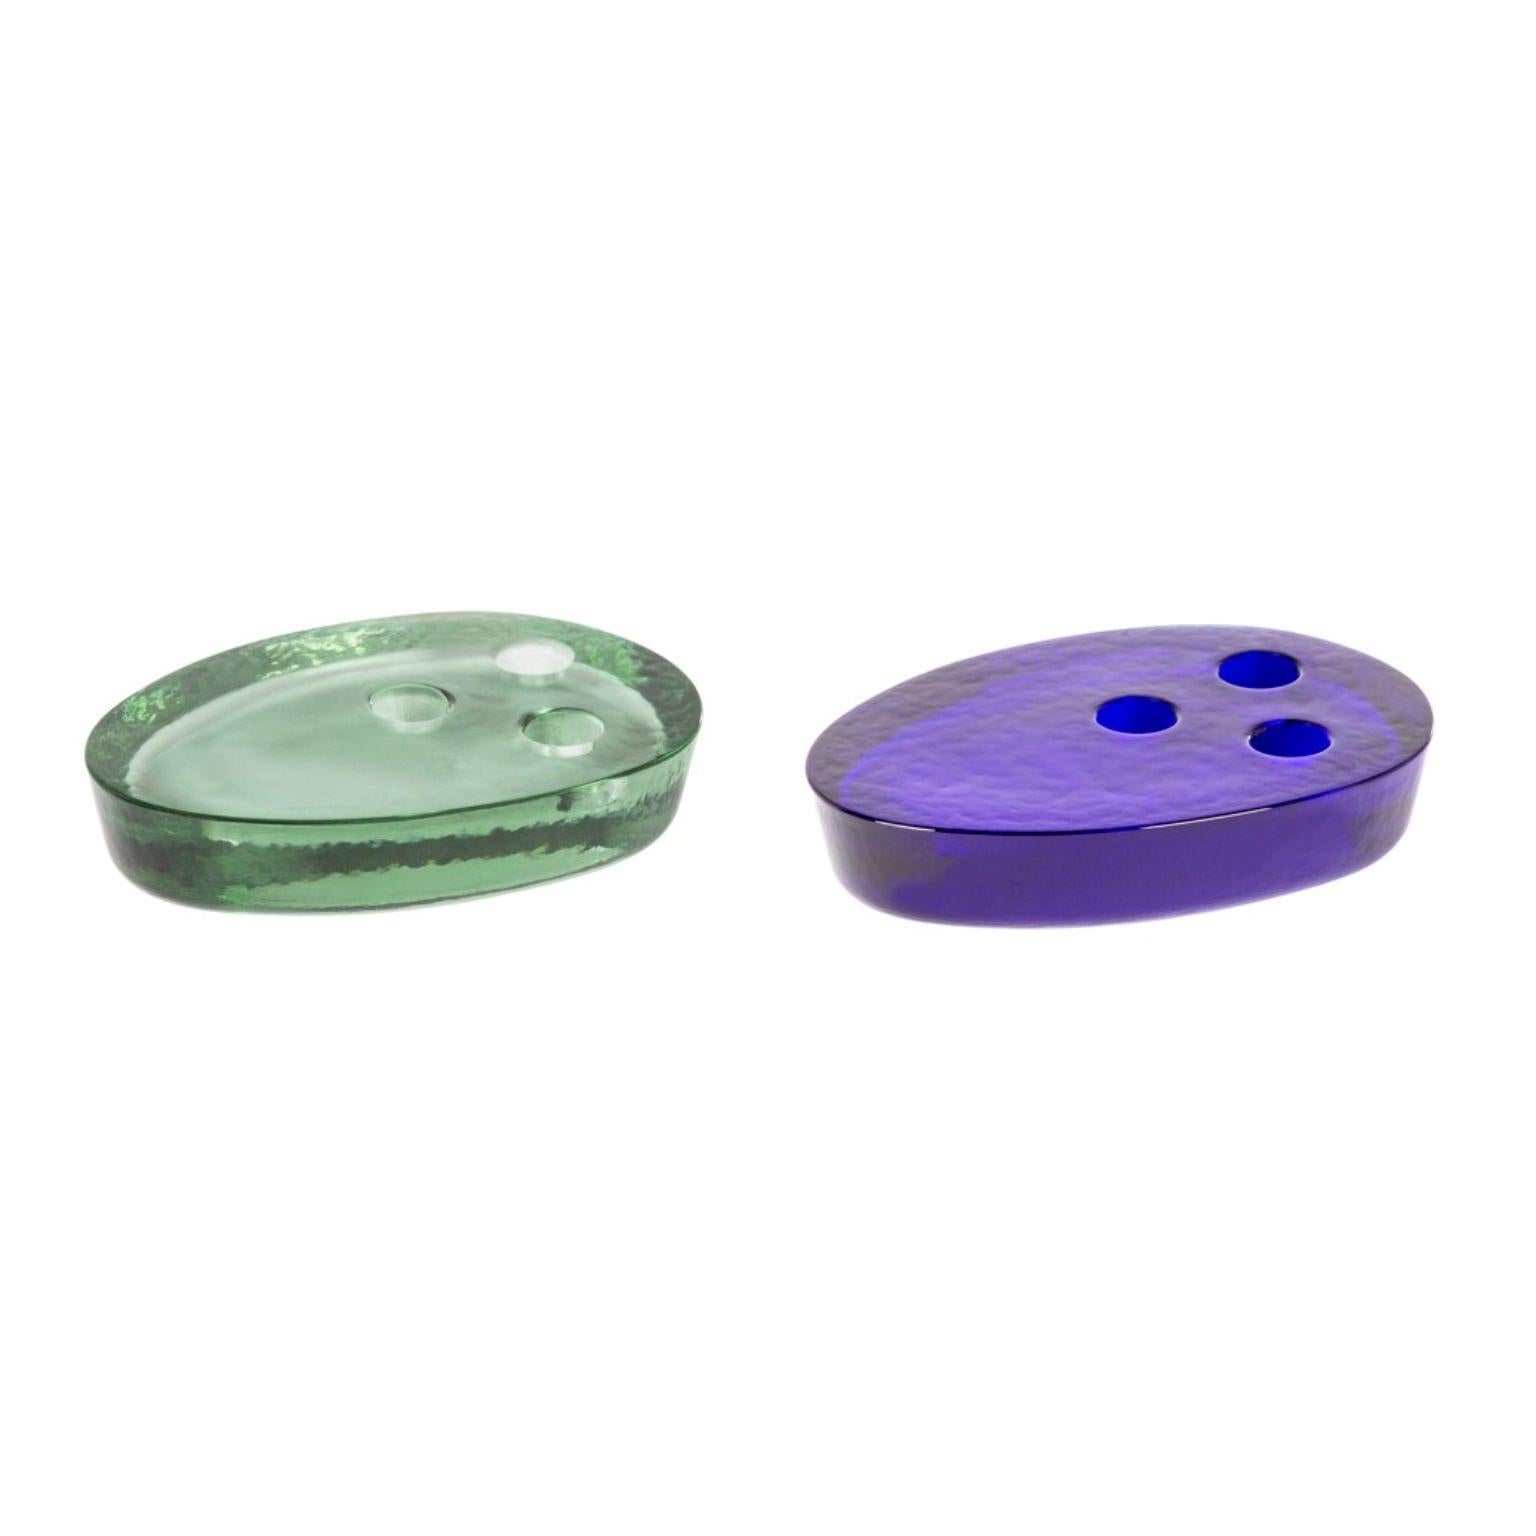 Set of 2 Atoll medium candle holders by Pulpo
Dimensions: D 30 x W 14 x H 4 cm
Materials: casted glass

Also available in different colours.

These simple forms refer to the free-form nature of volcanic islands – much like the changing of